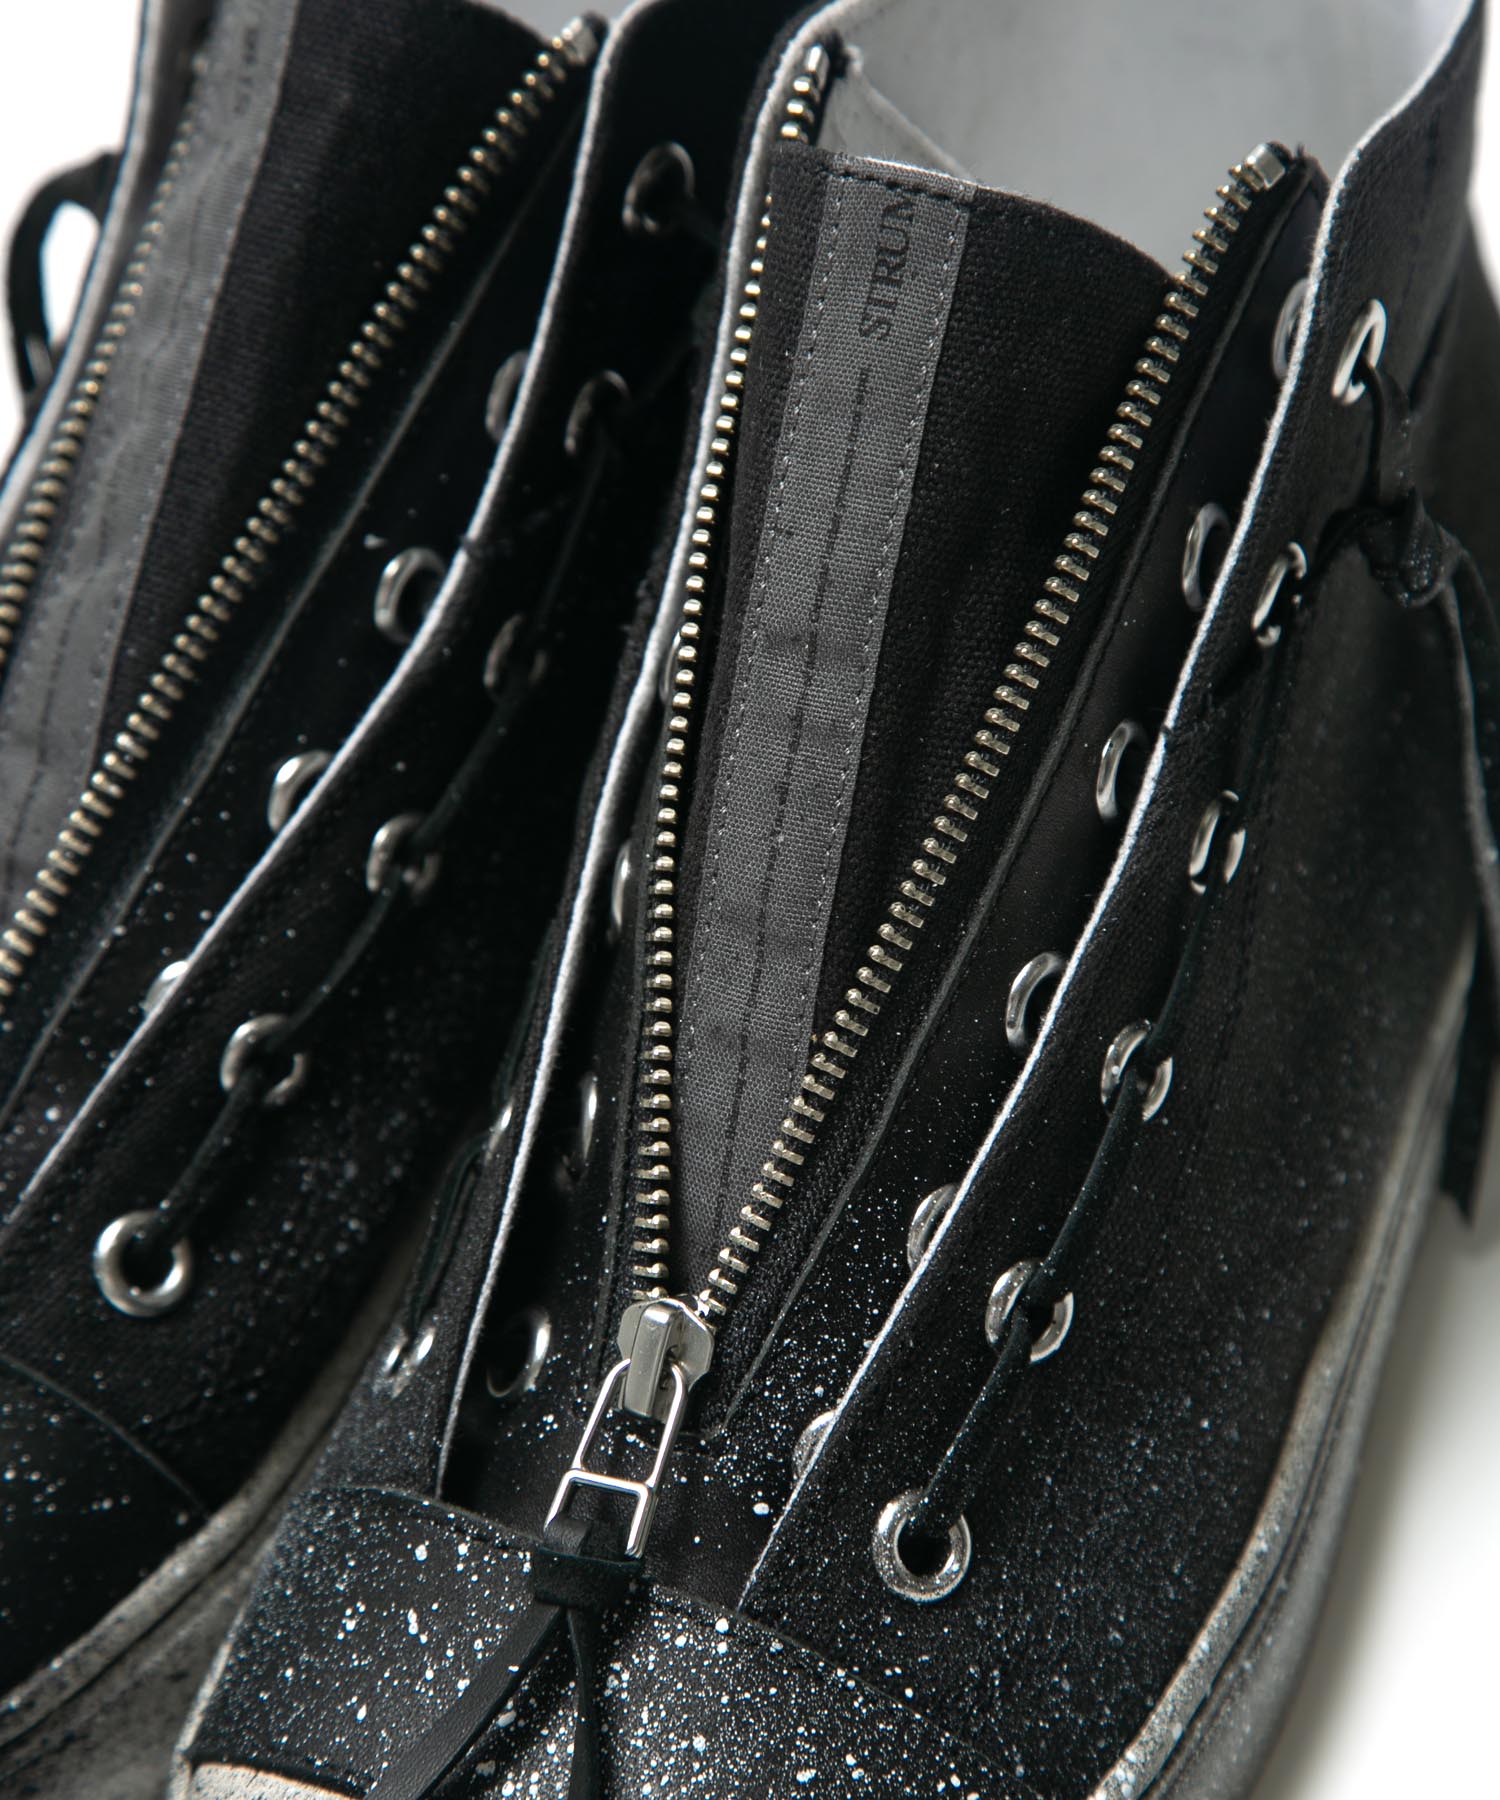 Load image into Gallery viewer, Leather Zip Tan Sneaker / BLACK